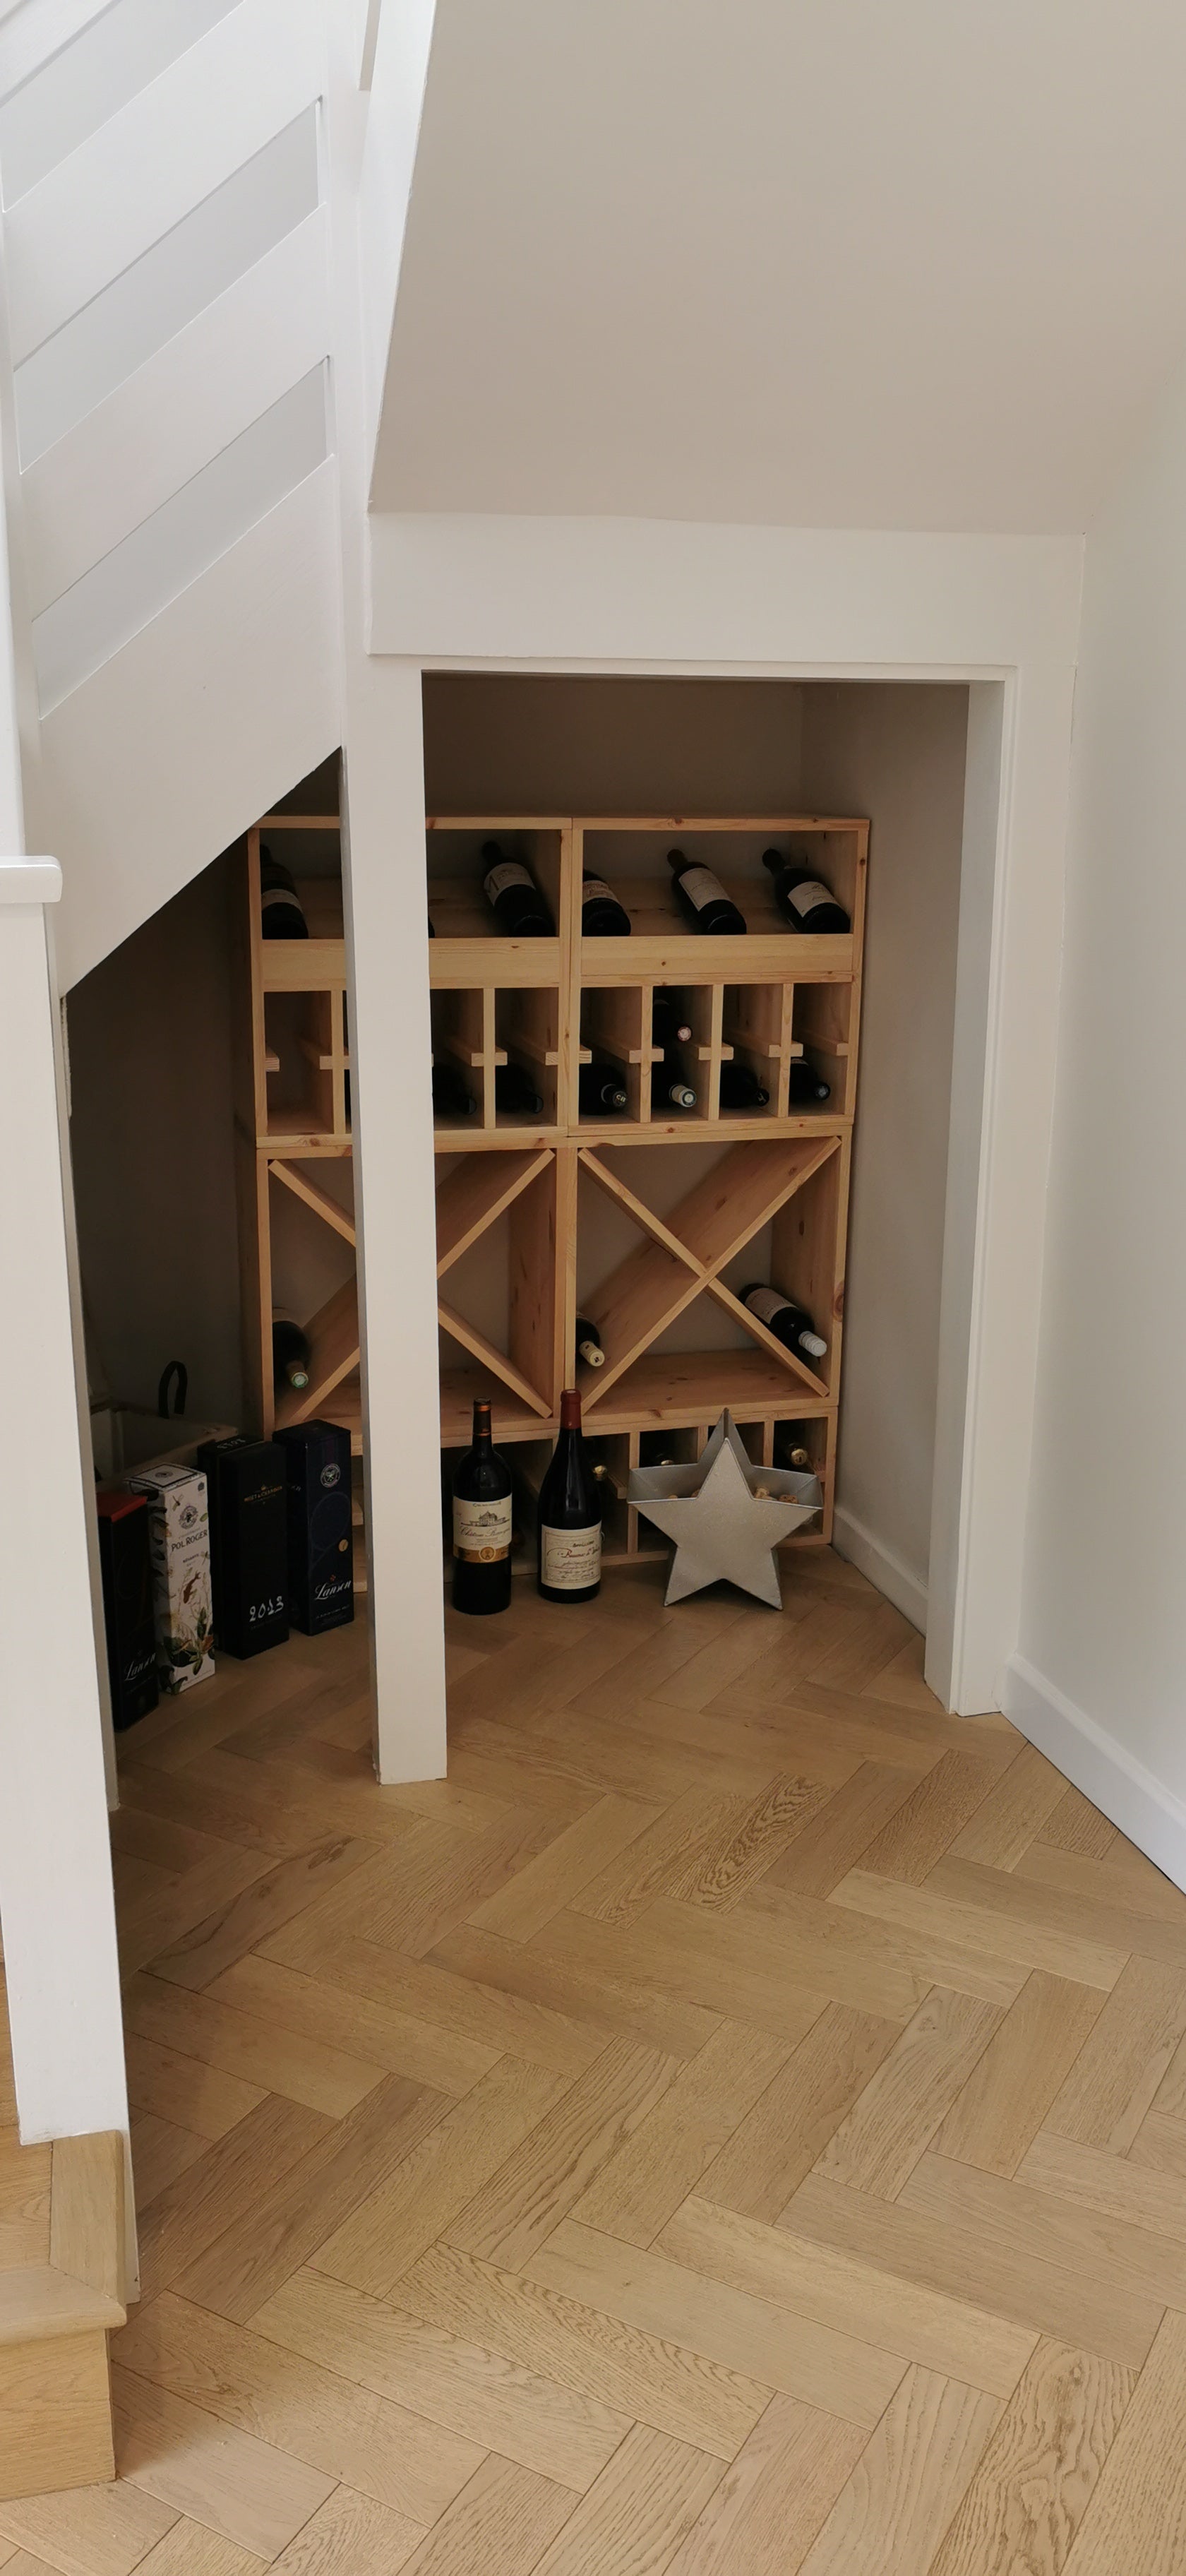 Sommelier™ Cross Cube - FULL DEPTH including neck with capacity of 24 bottles in this hand made modular wine cube